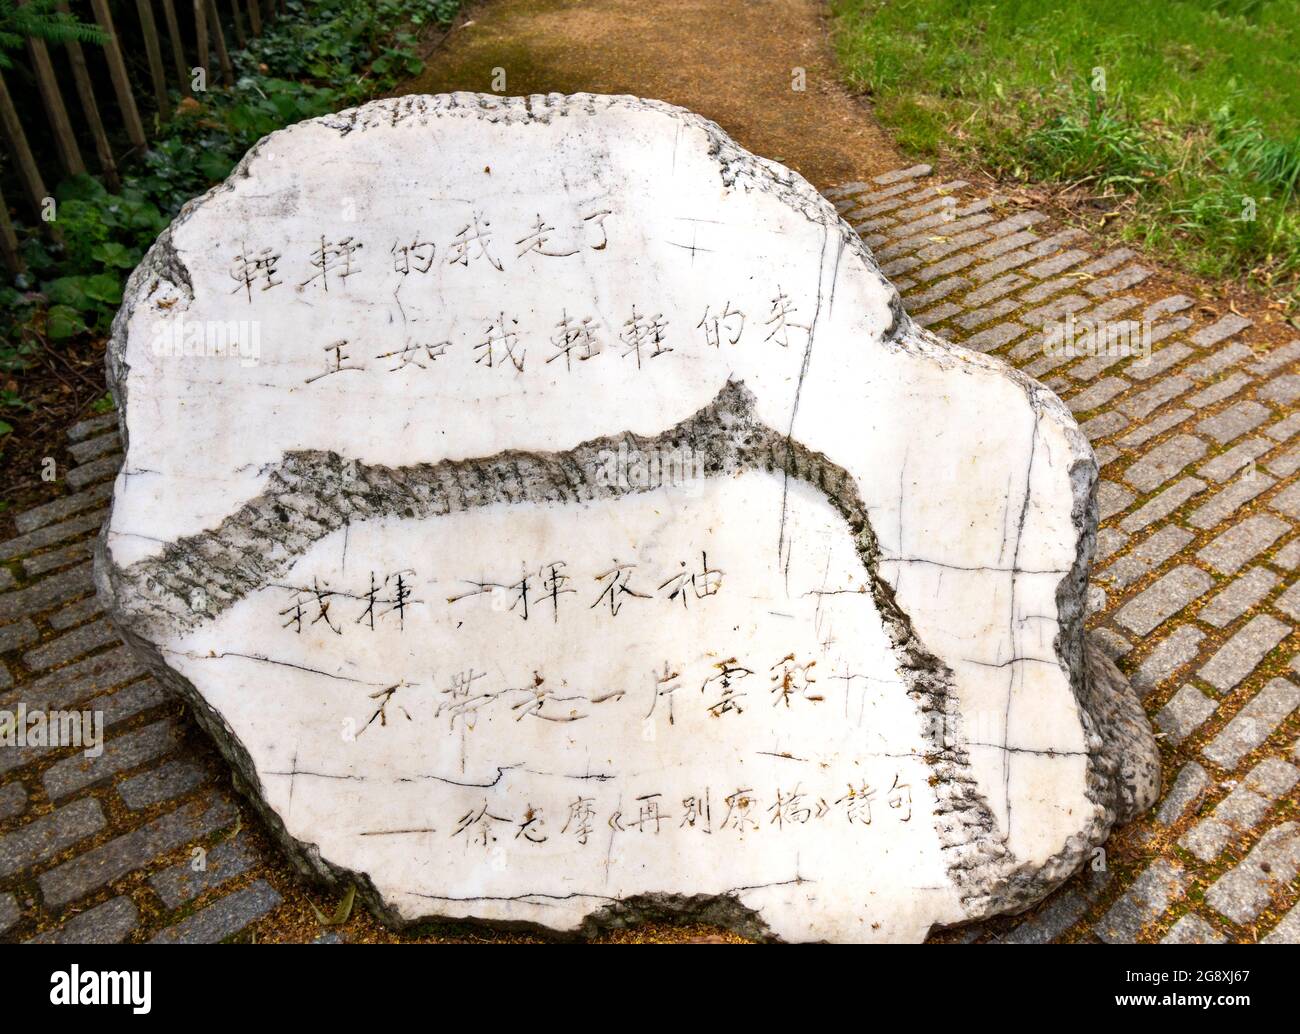 CAMBRIDGE ENGLAND KING'S COLLEGE MEMORIAL STONE FOR XU ZHIMO THE CHINESE POET Stock Photo